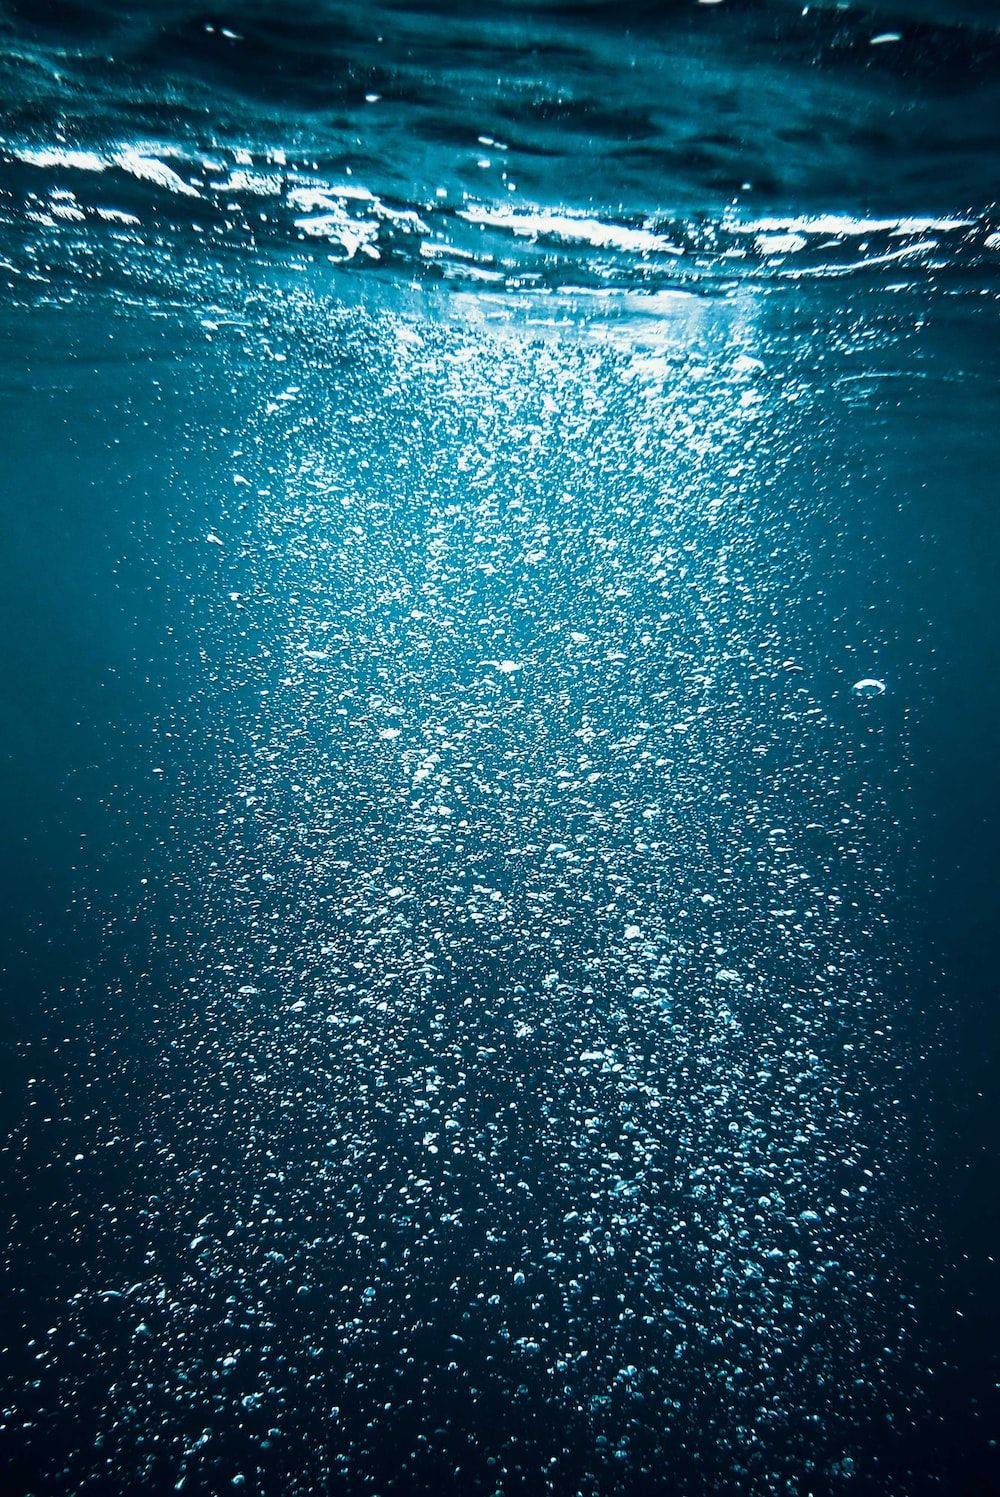 An underwater view of the ocean with bubbles photo